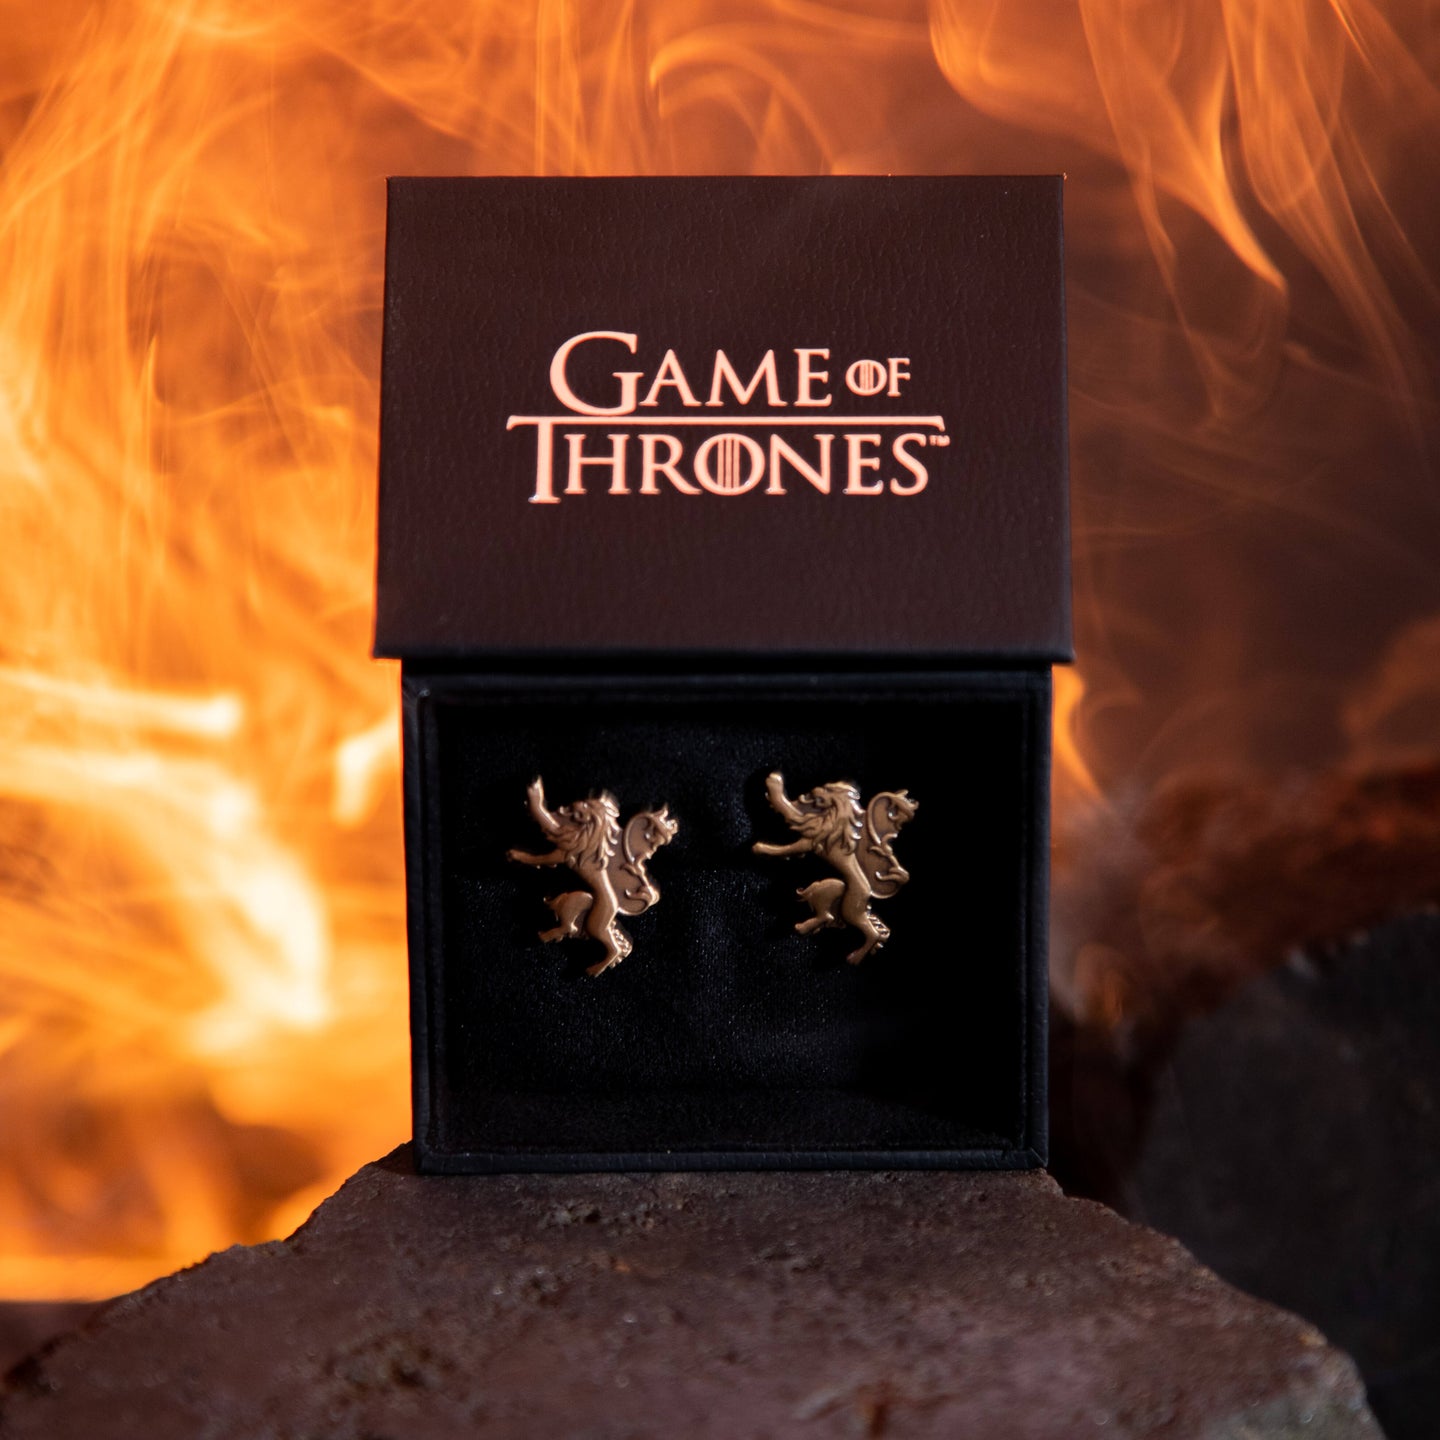 Official Game of Thrones Lannister Cufflinks in Display Gift Box